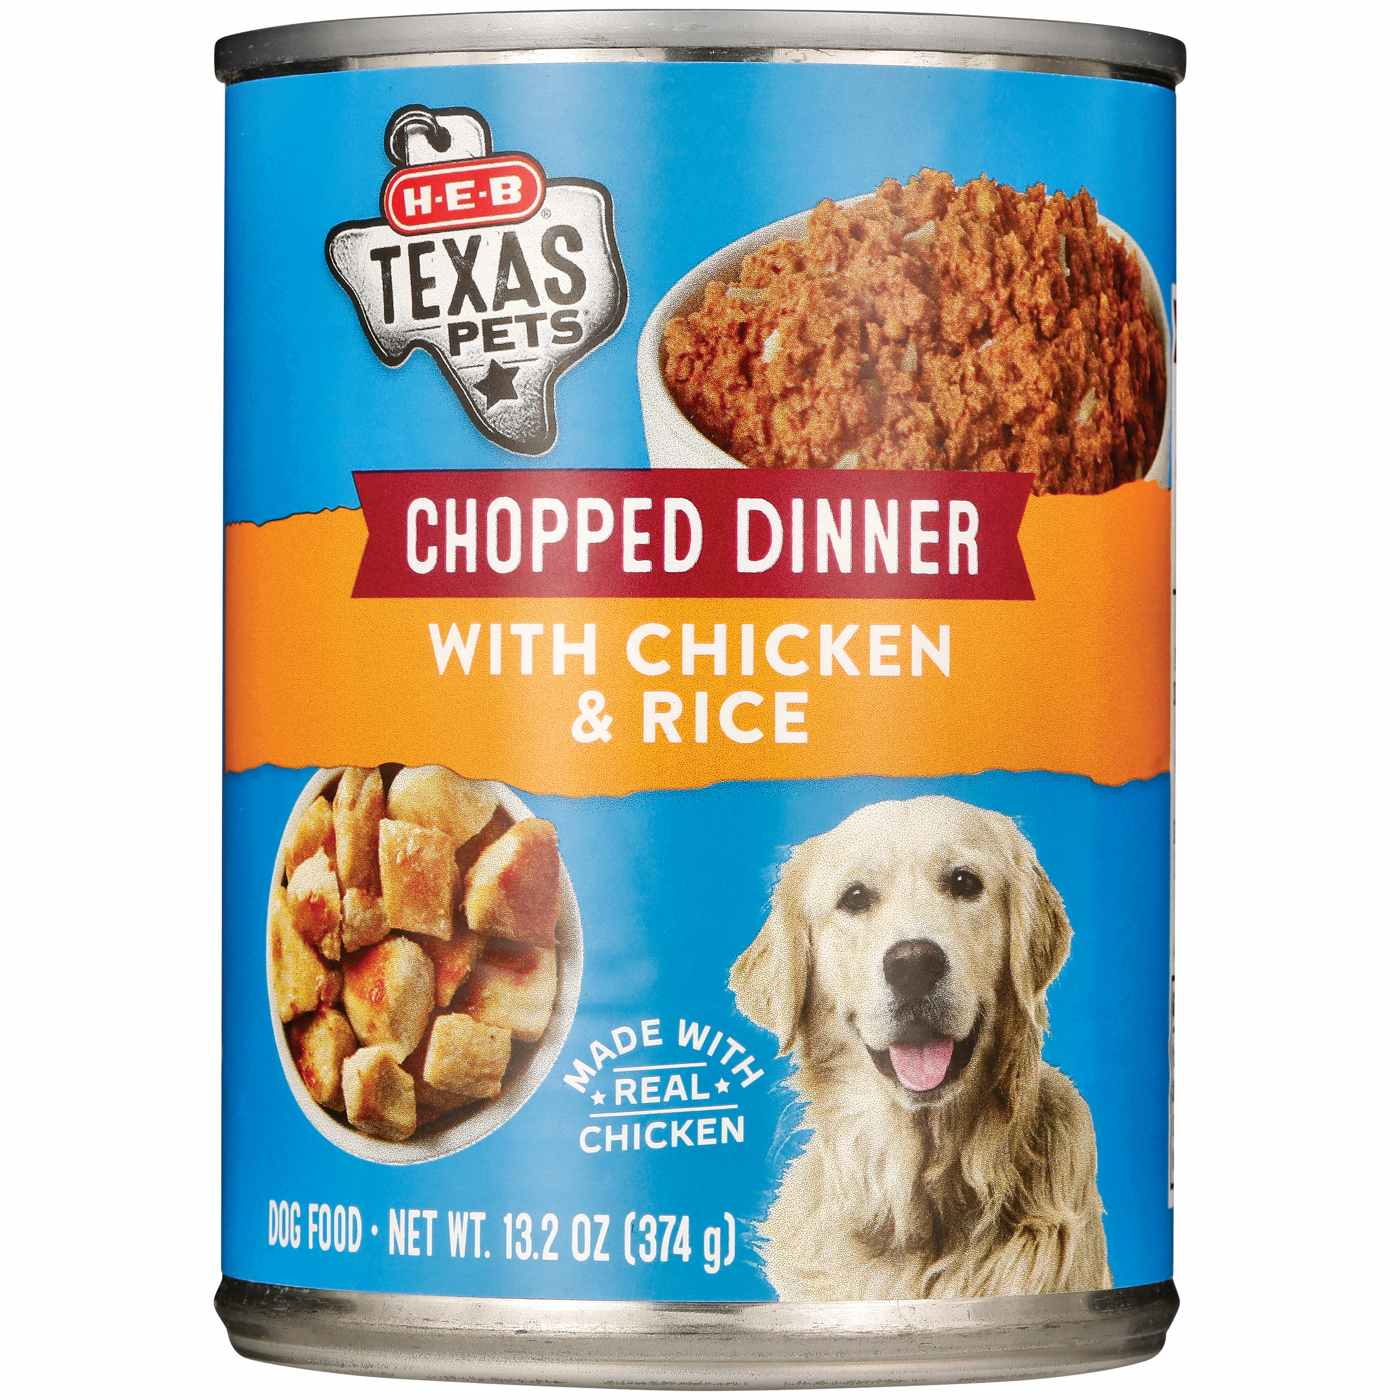 H-E-B Texas Pets Chopped Chicken & Rice Wet Dog Food; image 1 of 2